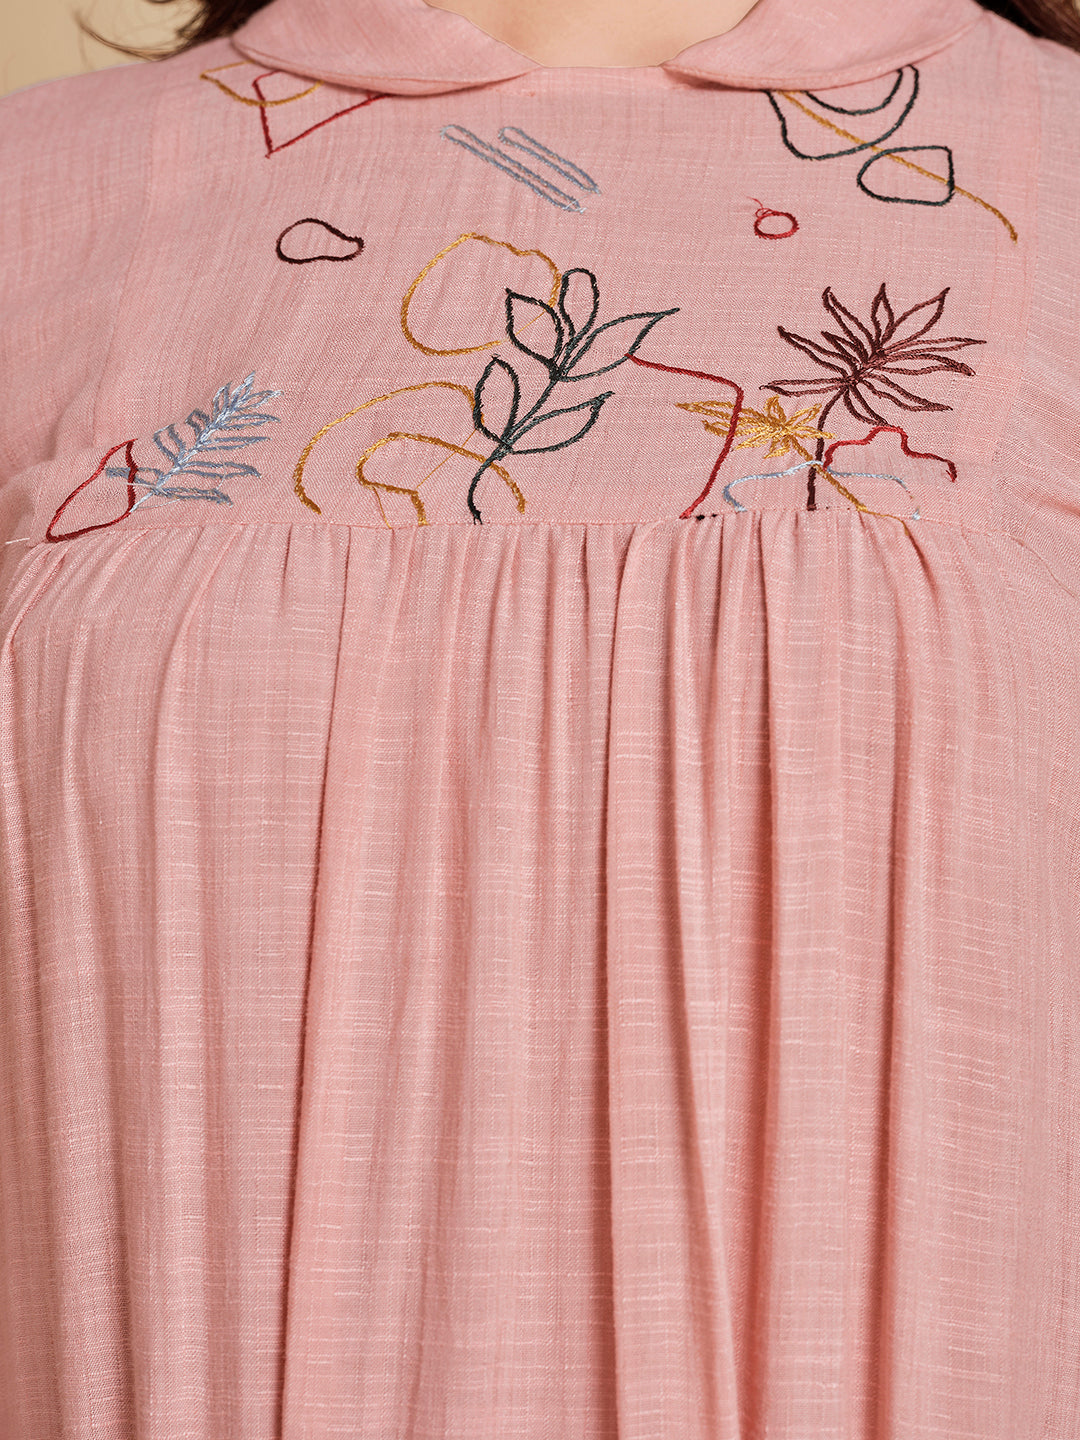 Pink Embroidered A-Line Dress - ARH450